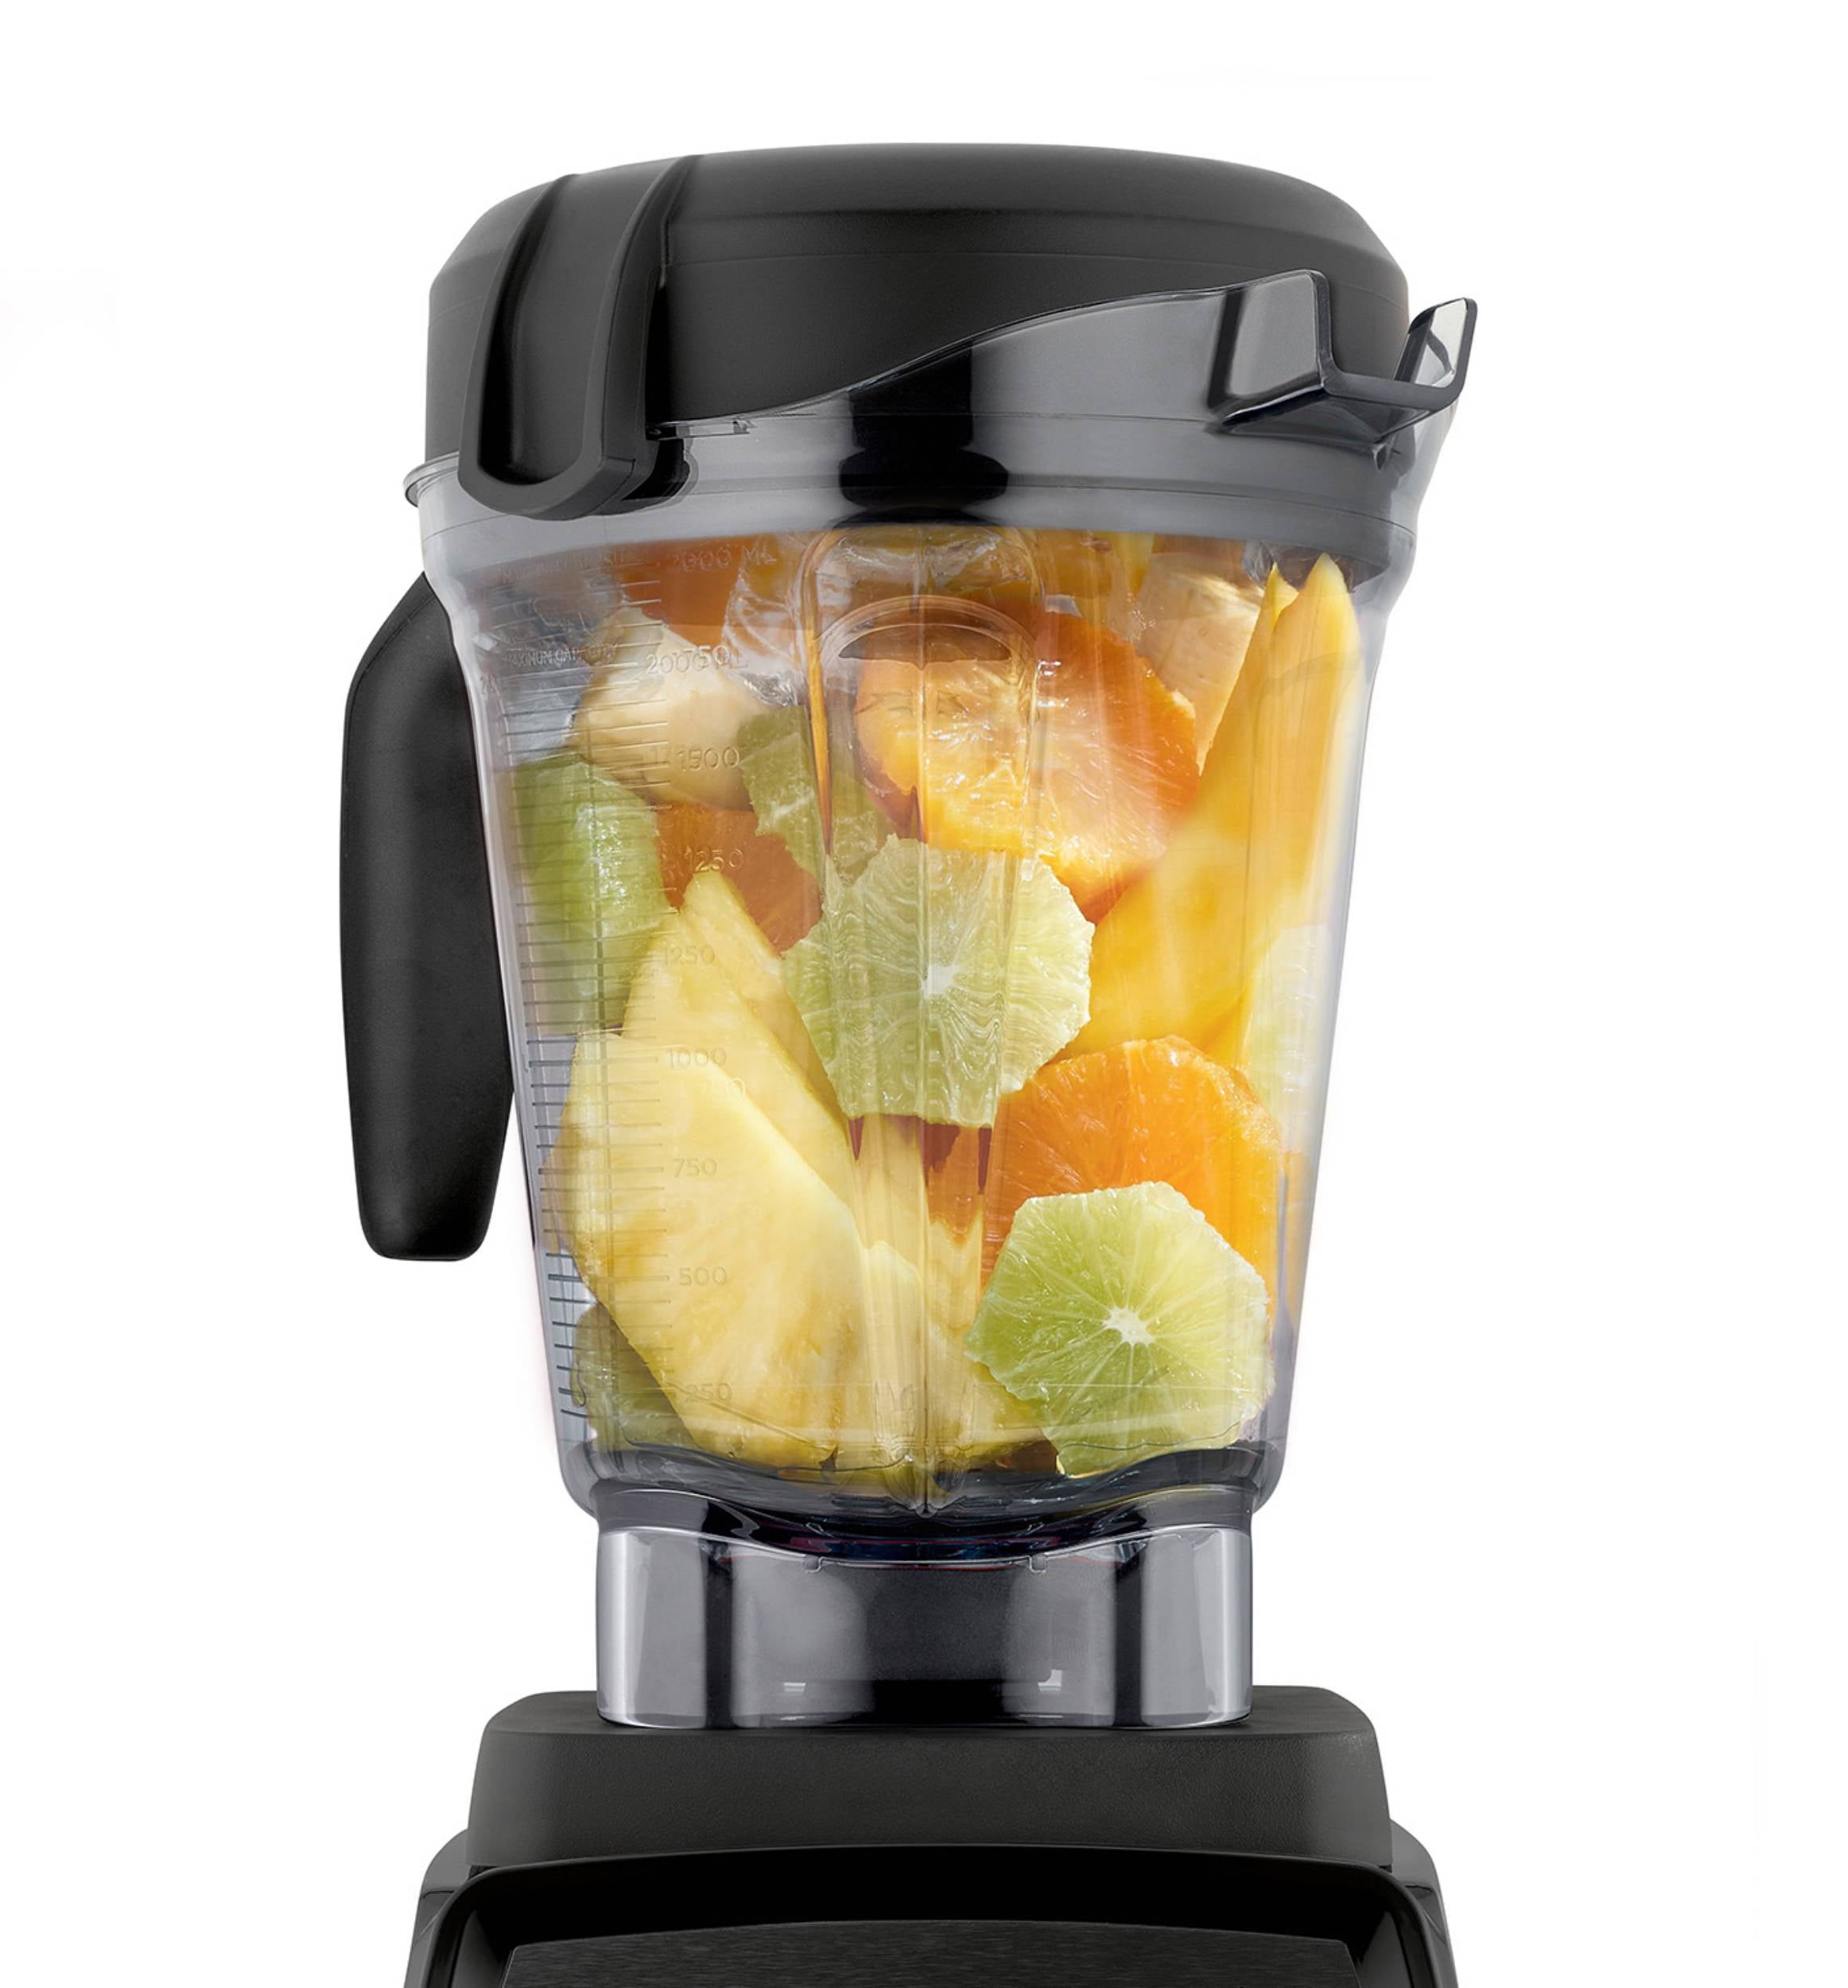 Luxja Blender Cover Compatible with Vitamix 64 oz. Low-Profile Blender, Gray